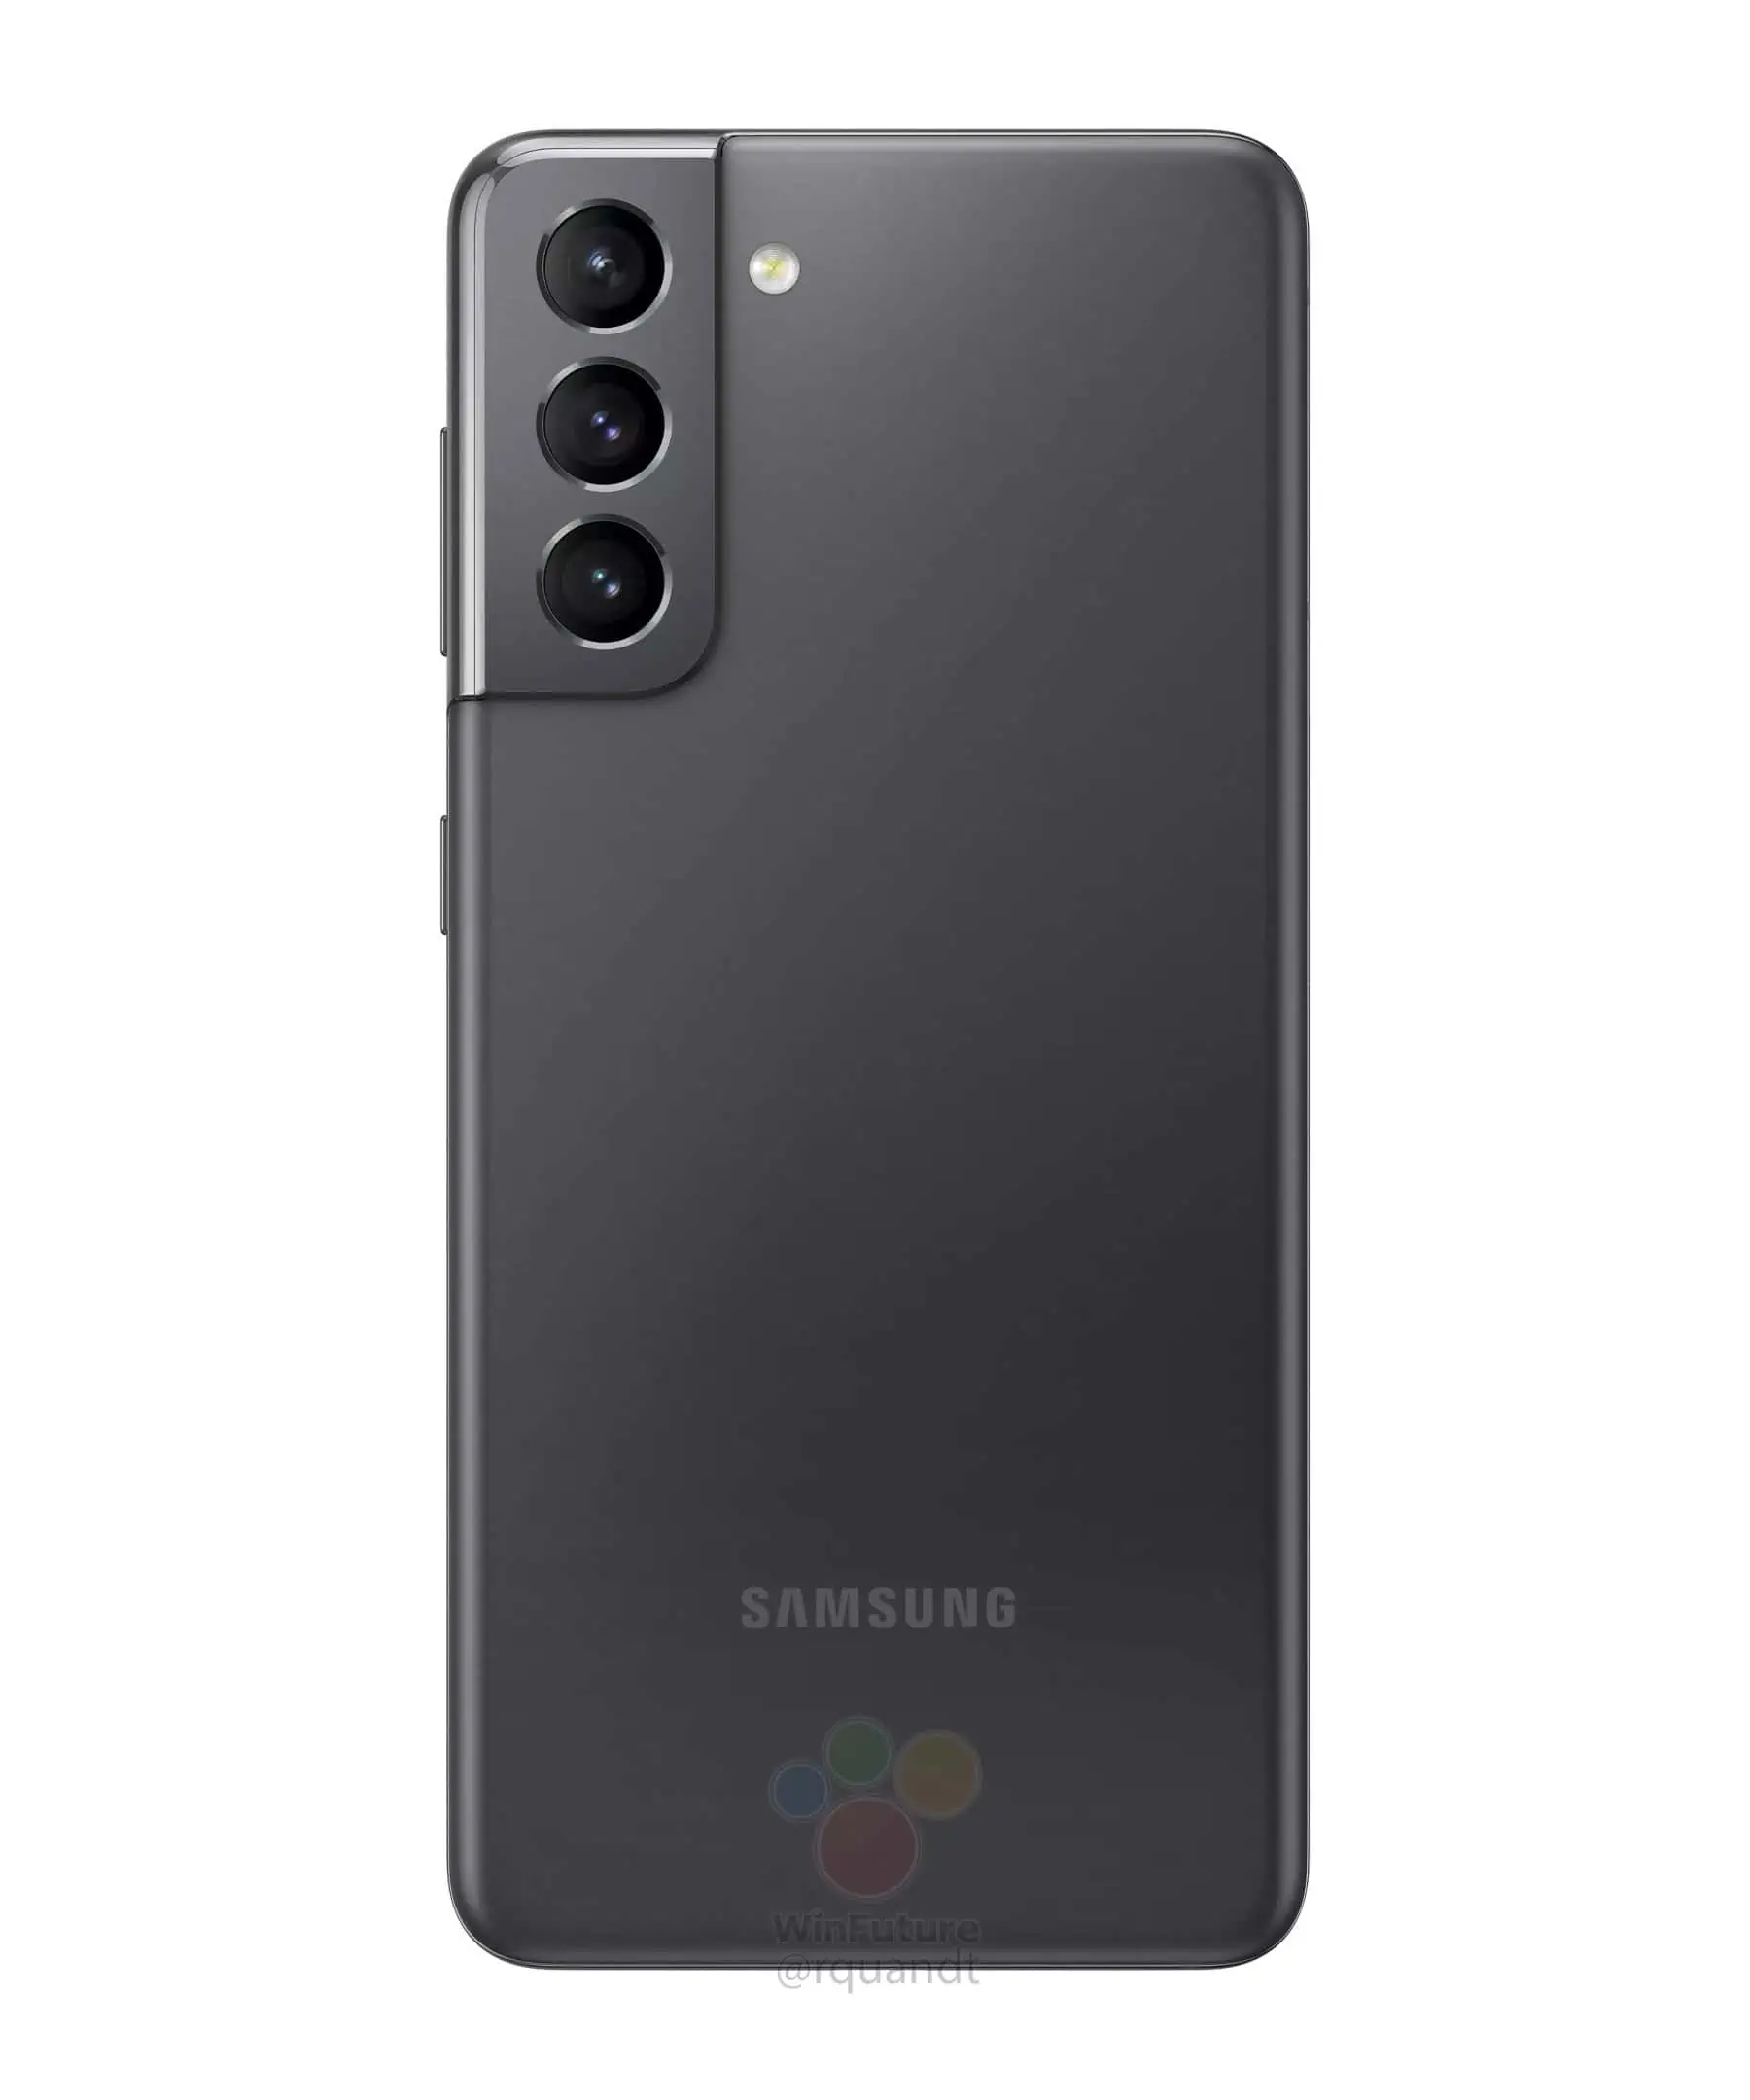 Spec sheet of the Samsung Galaxy S21 and S21 Plus posted